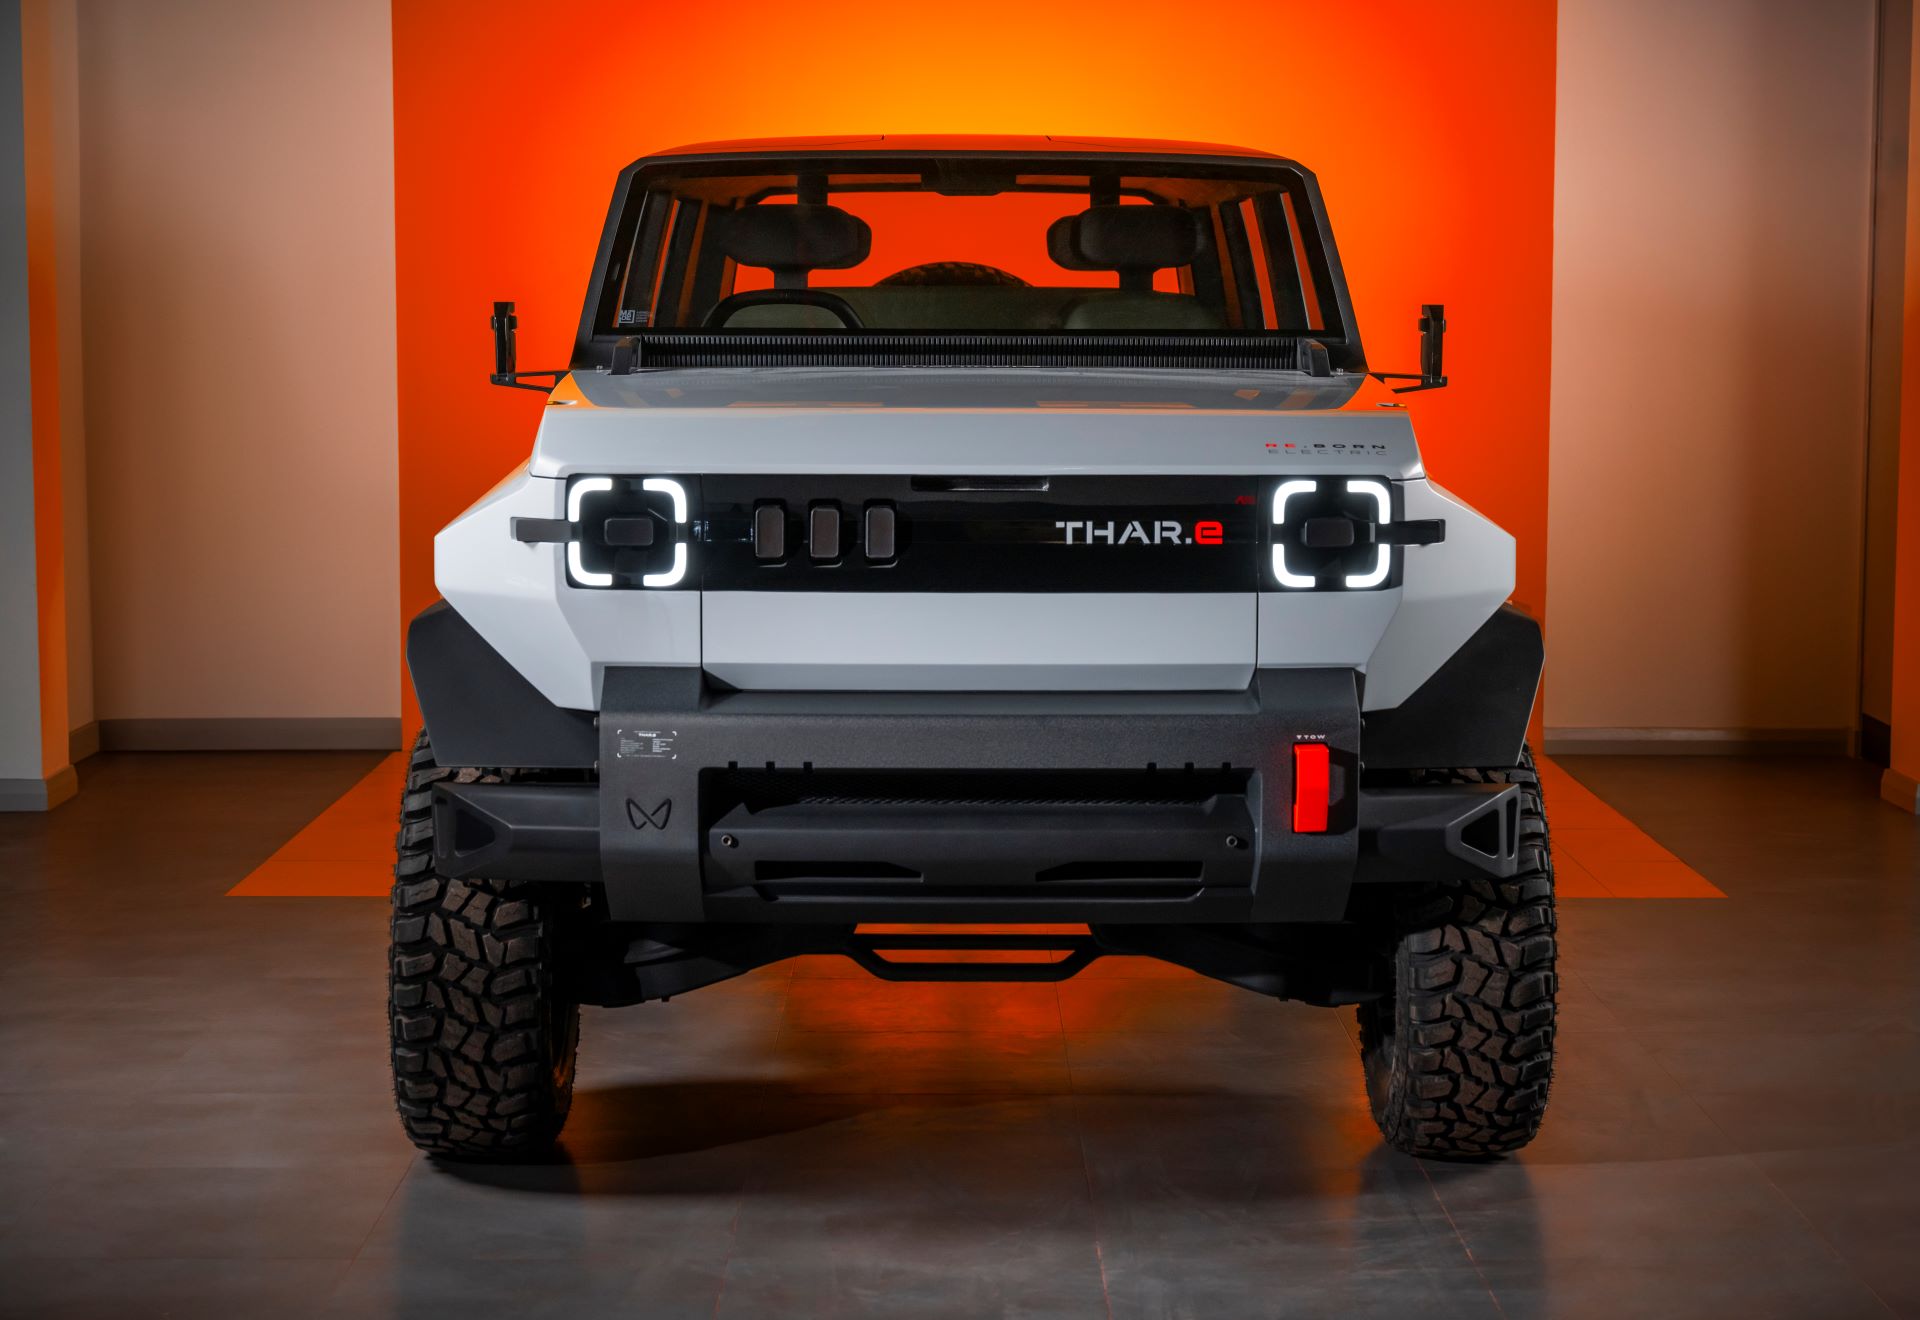 Mahindra Takes the Covers Off its “Vision Thar.e”